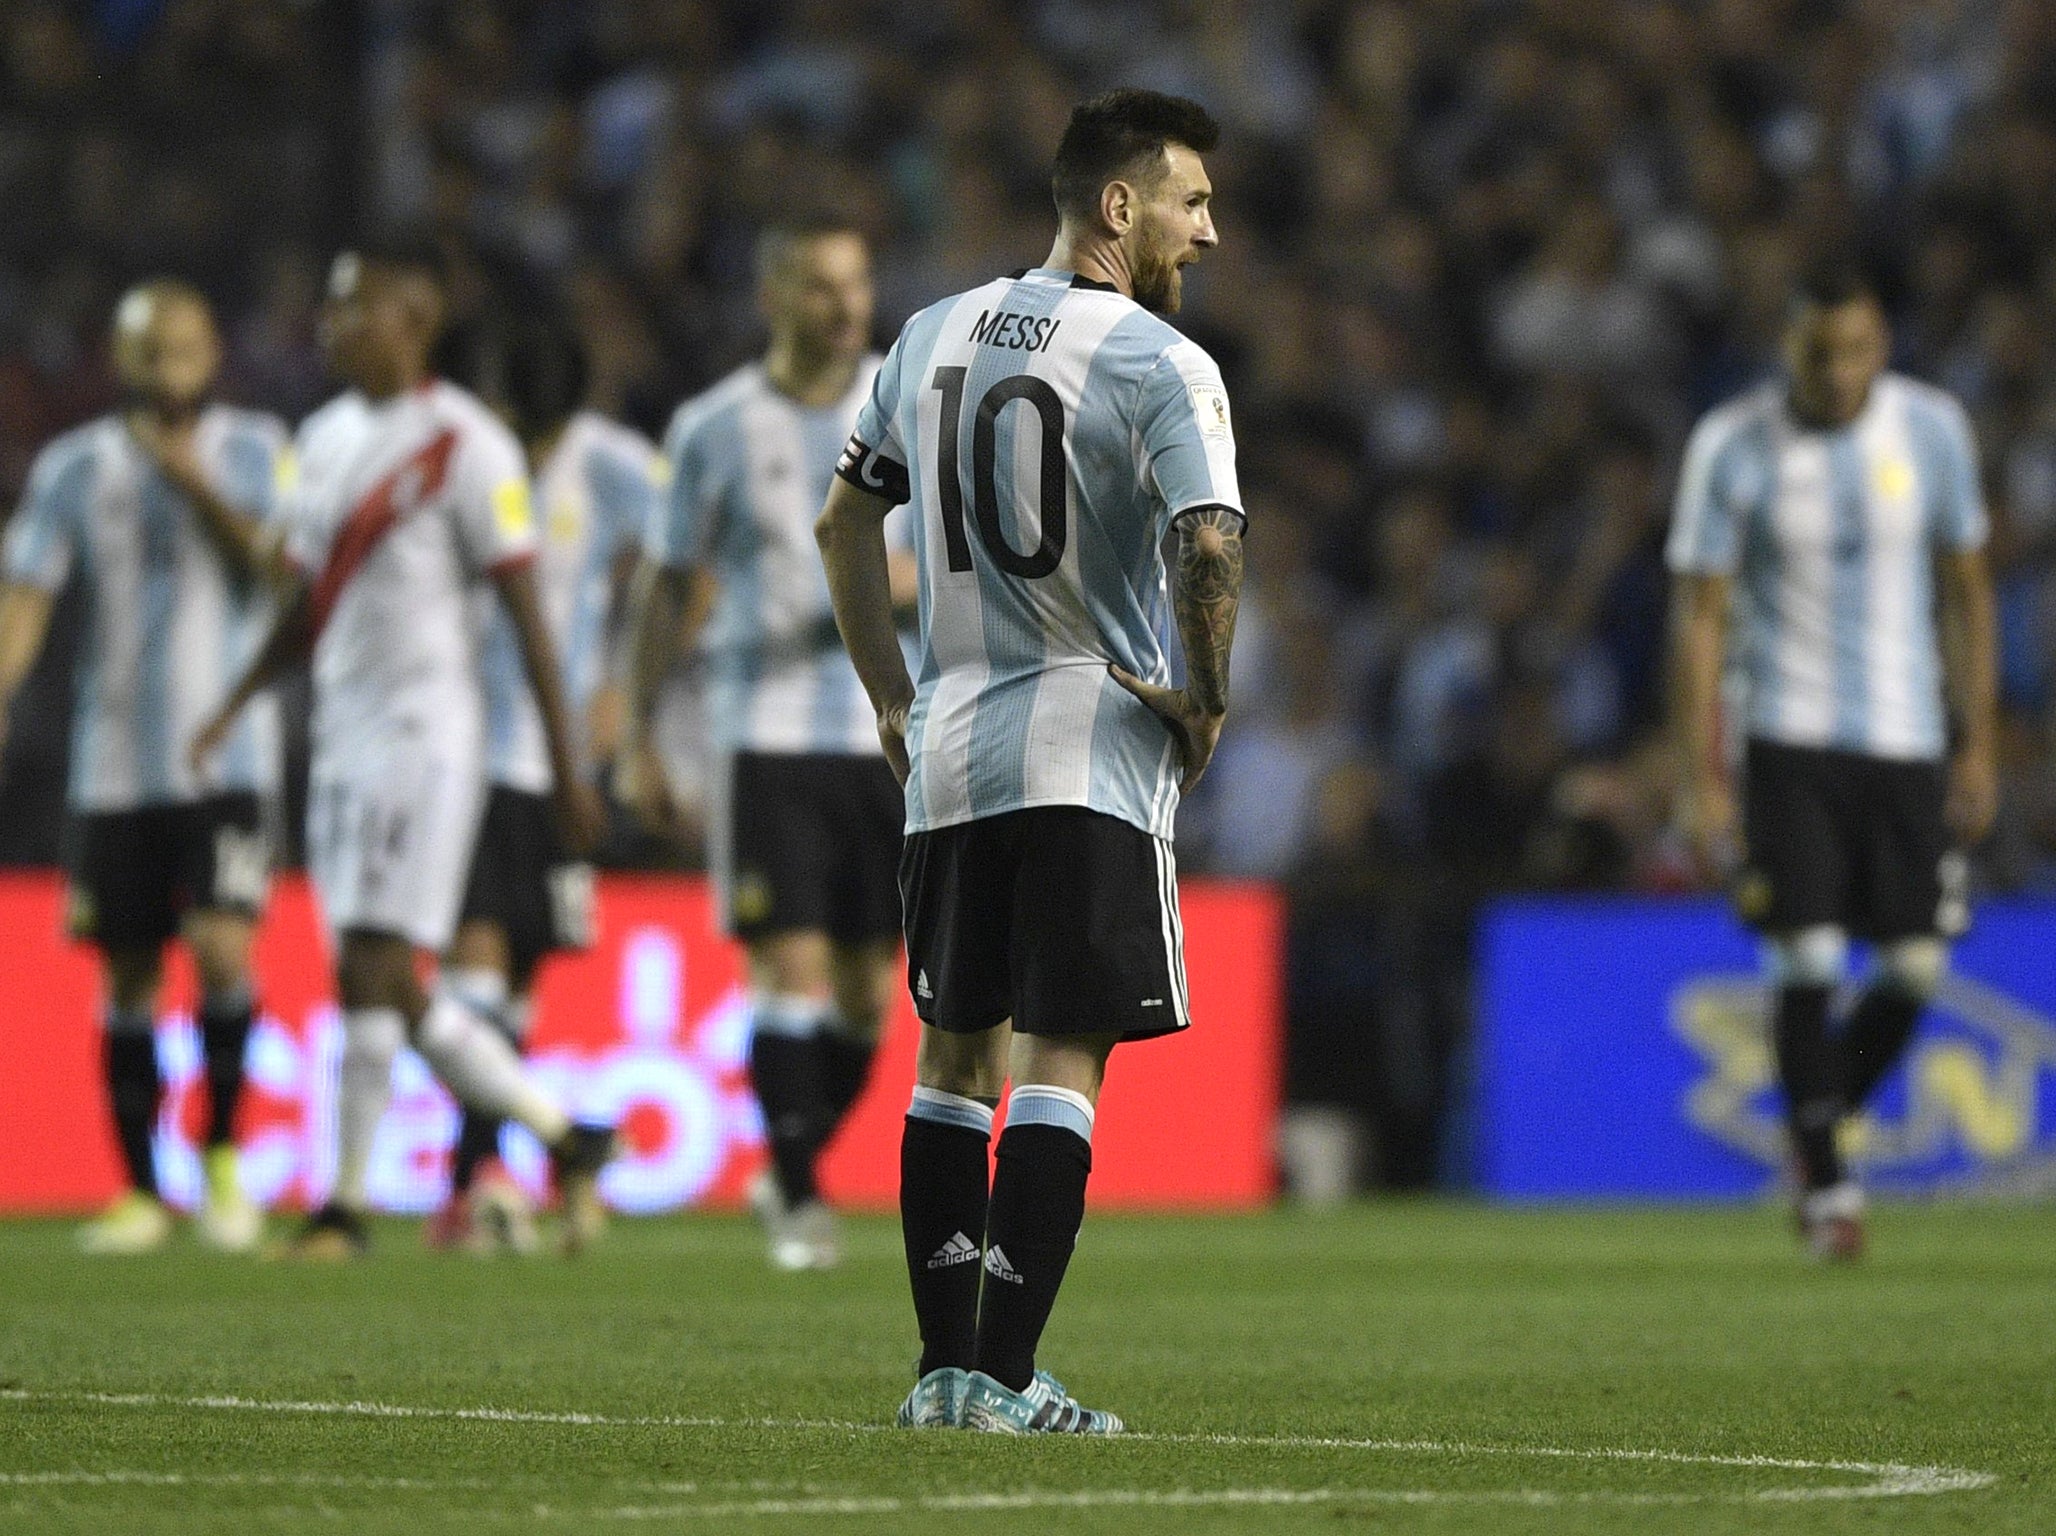 Argentina are on the verge of missing out on Russia 2018